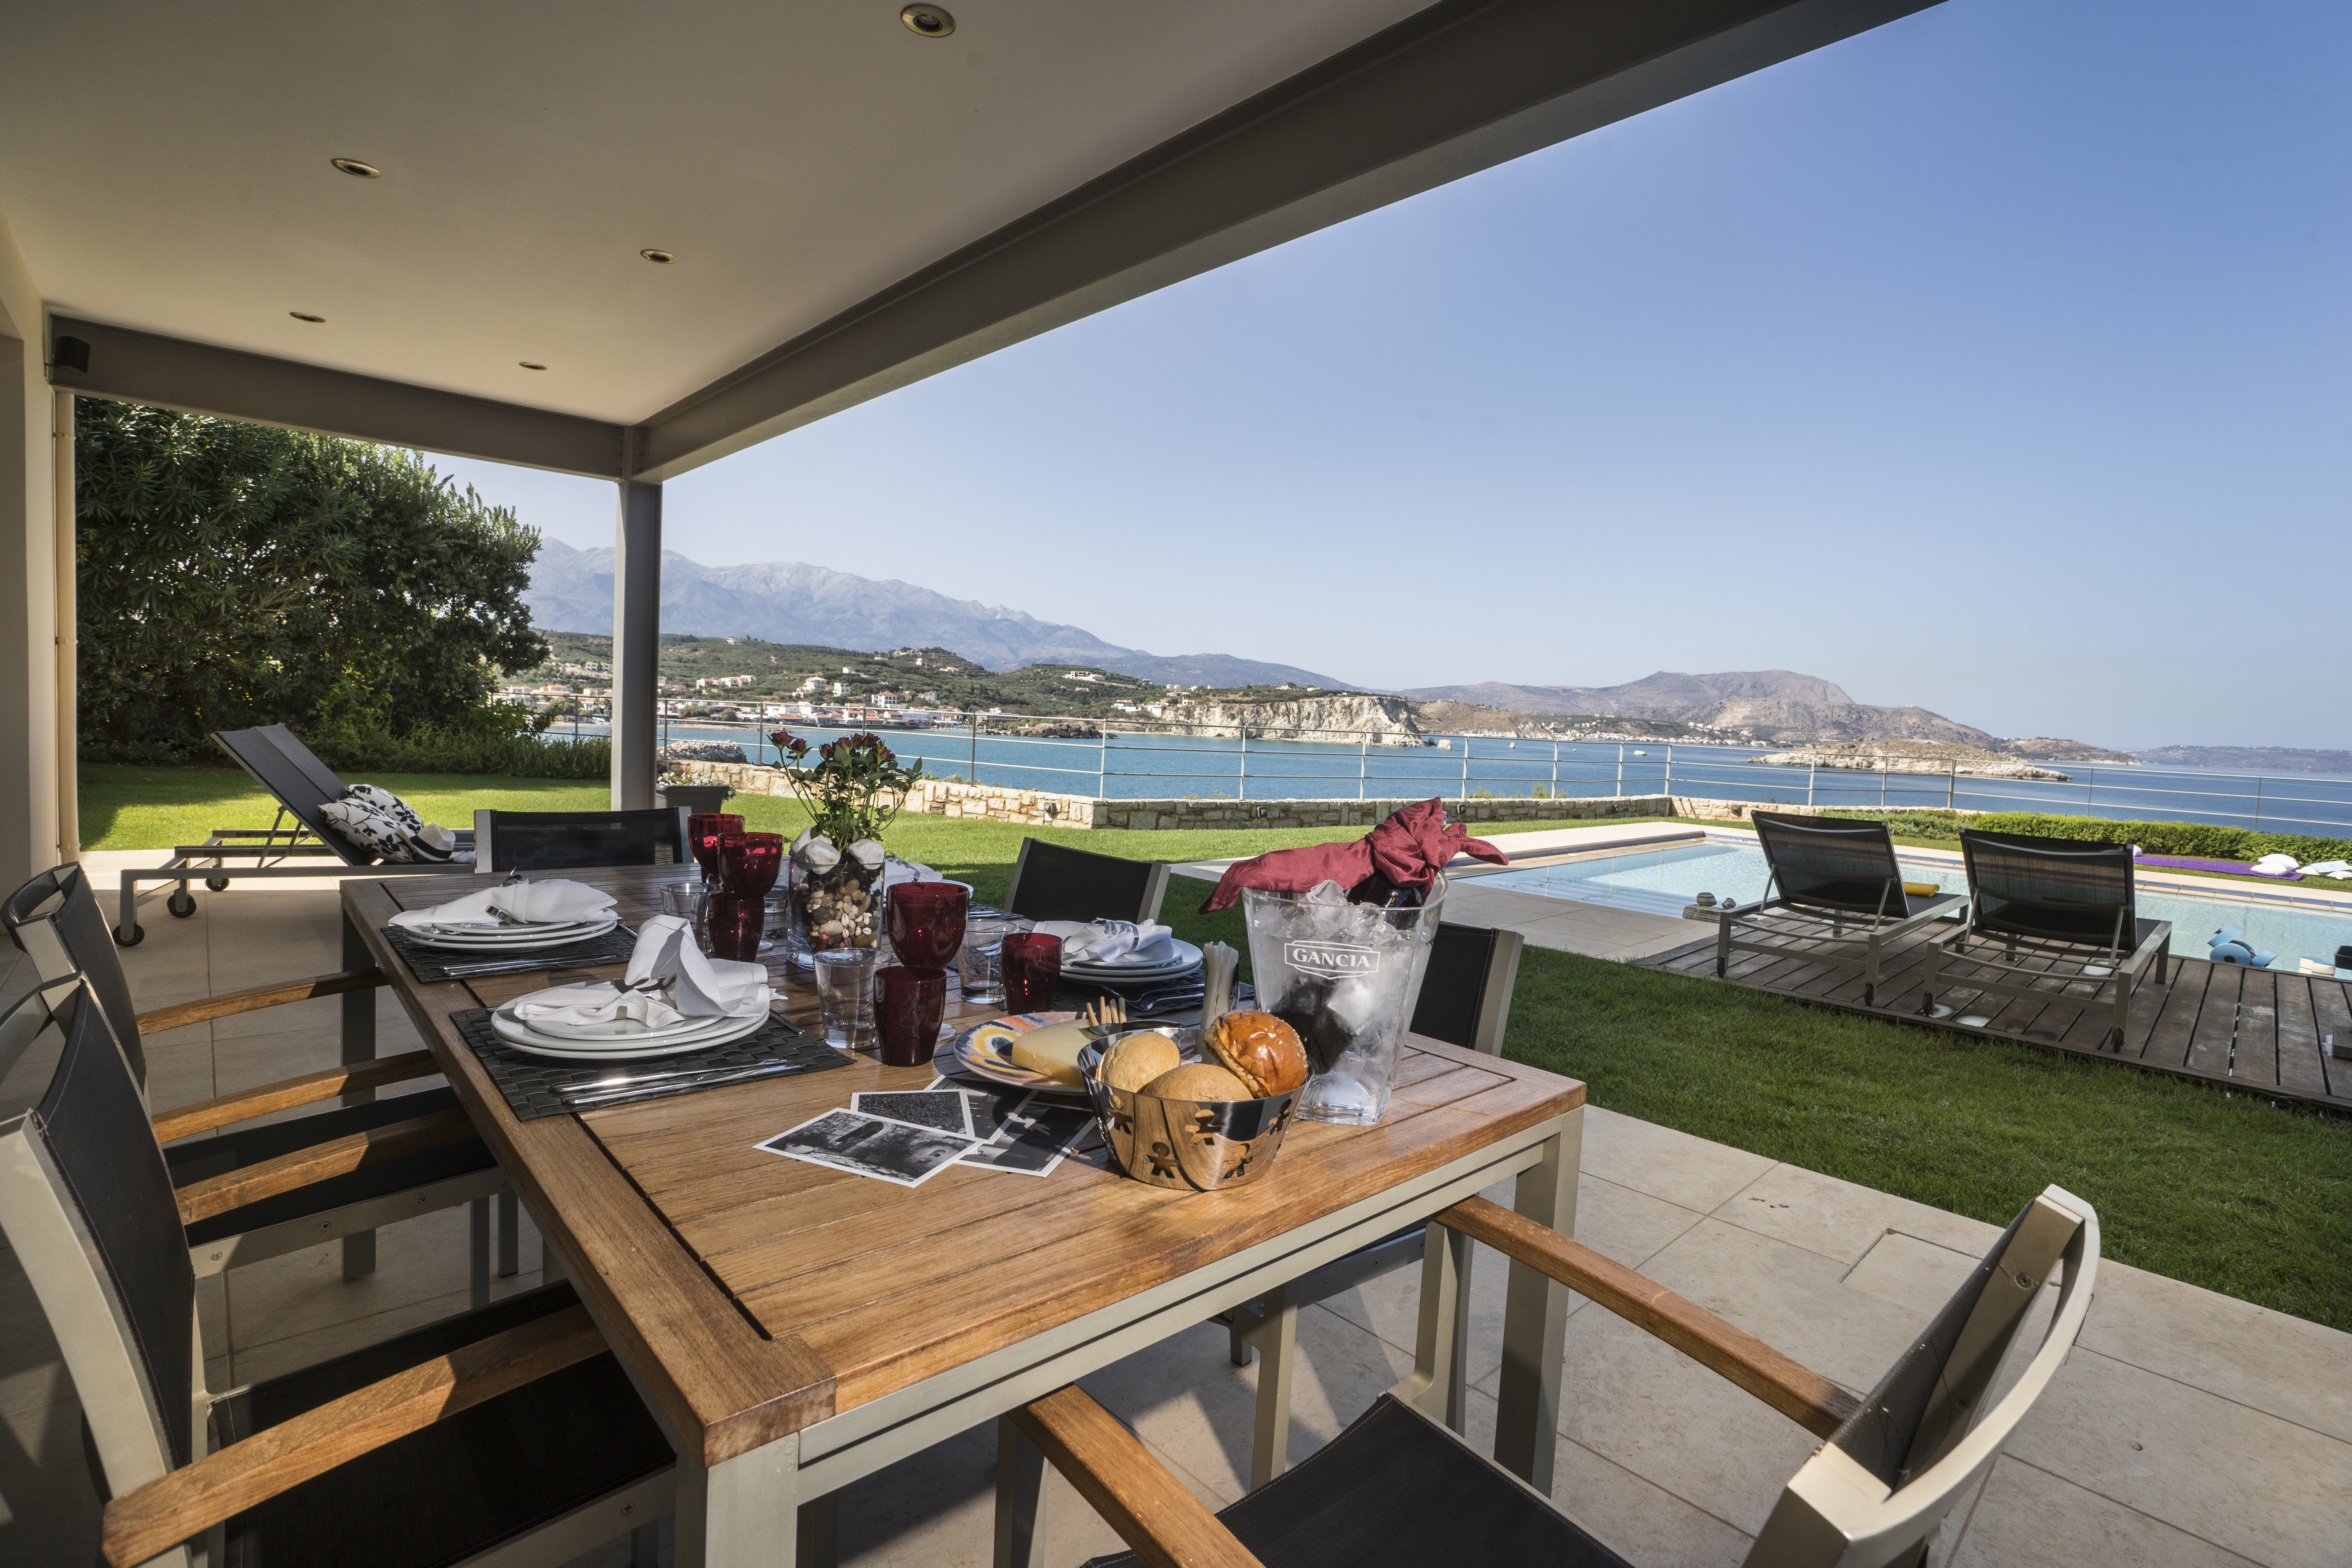 Outdoor dining at Almyra Residence